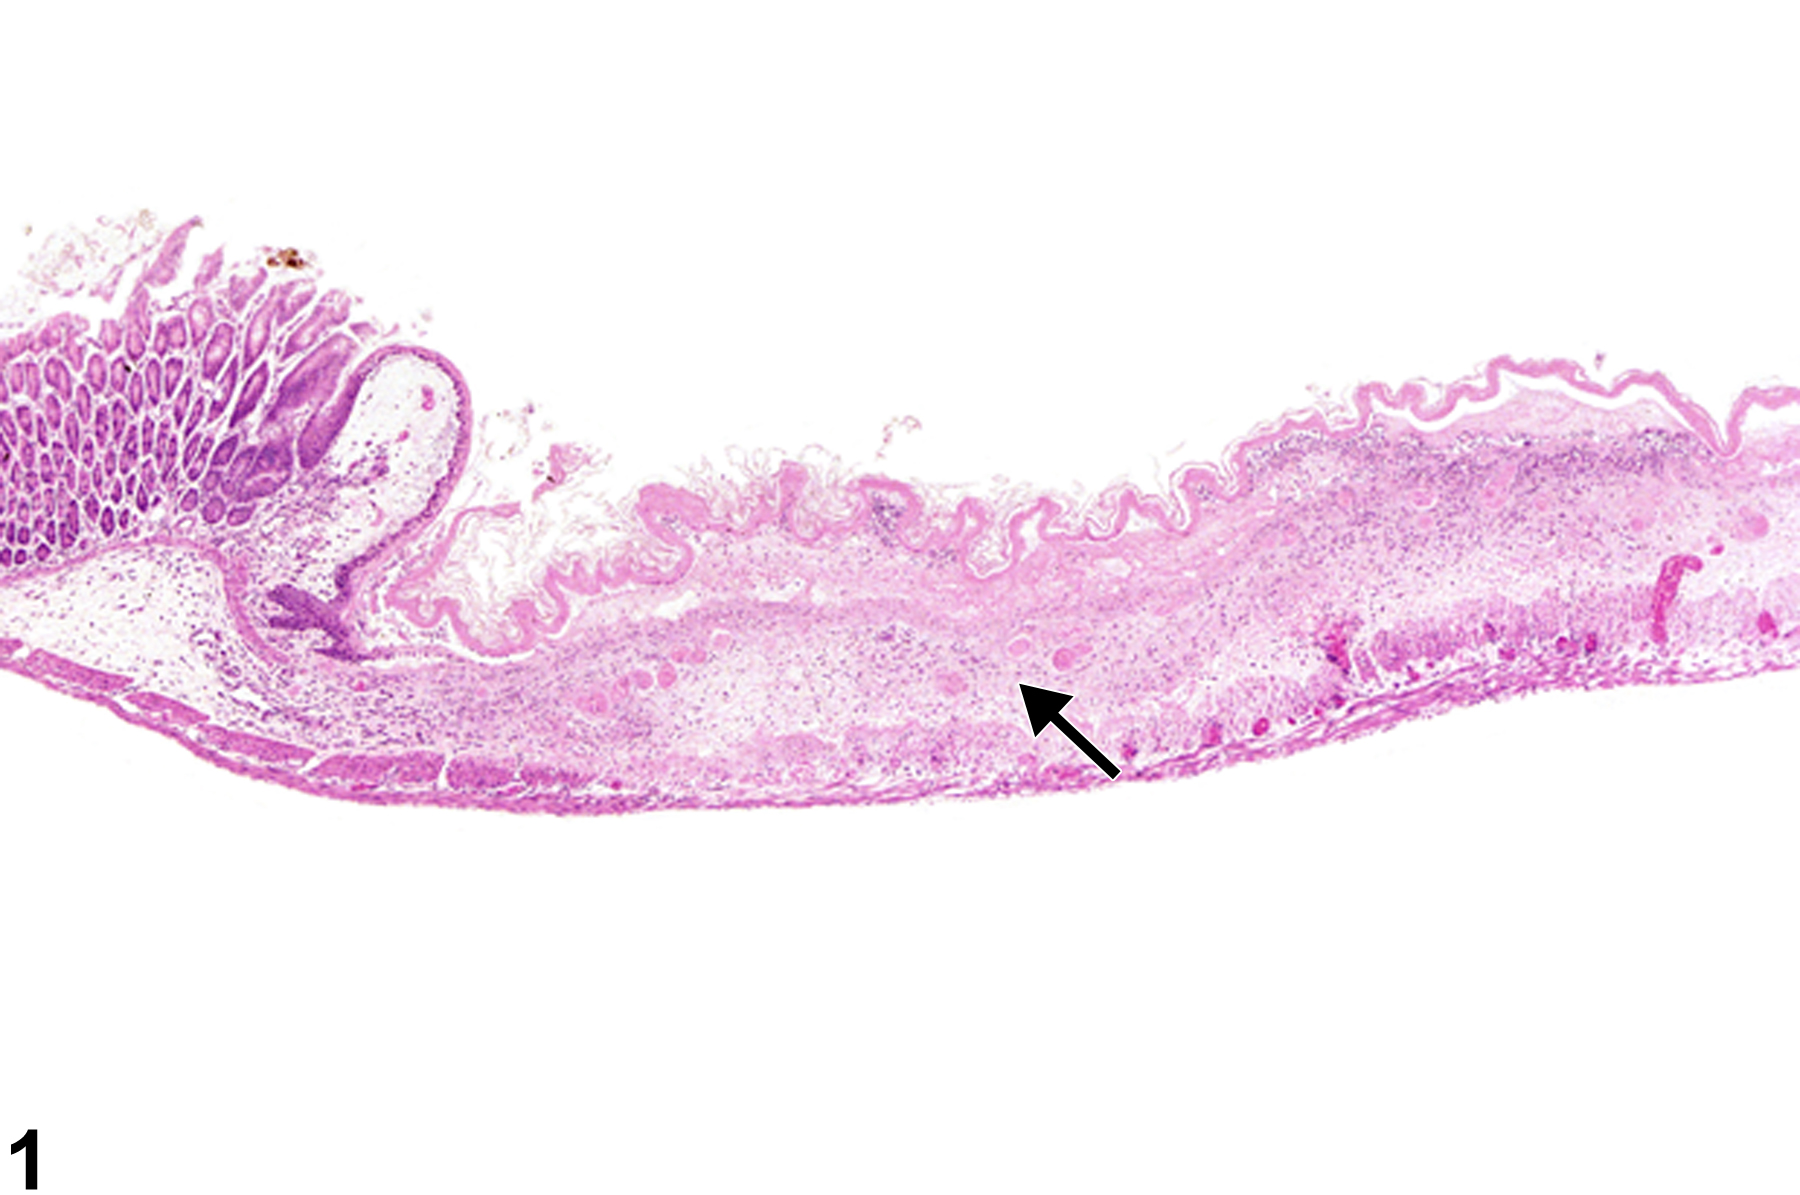 Image of necrosis in the forestomach from a female B6C3F1 mouse in a chronic study